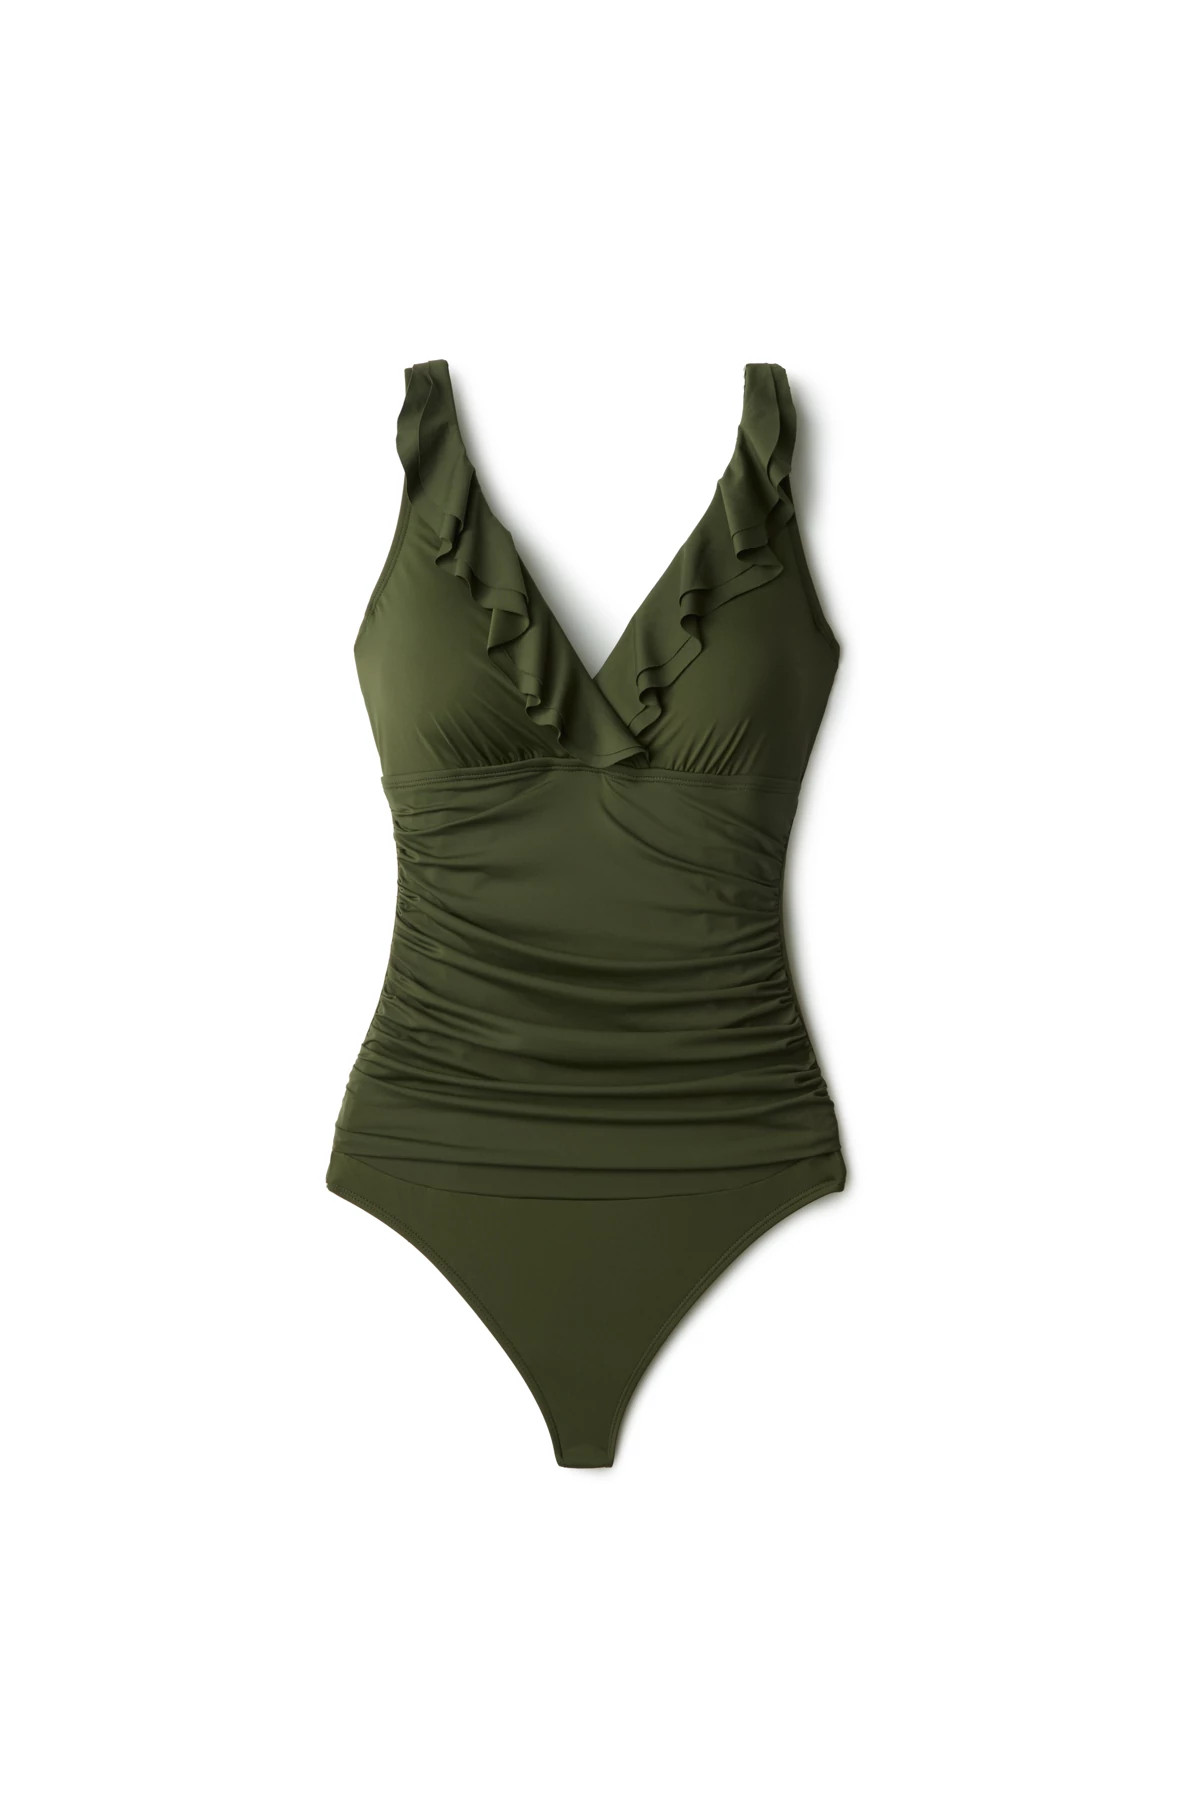 OLIVE Ruffle Over The Shoulder One Piece Swimsuit image number 3